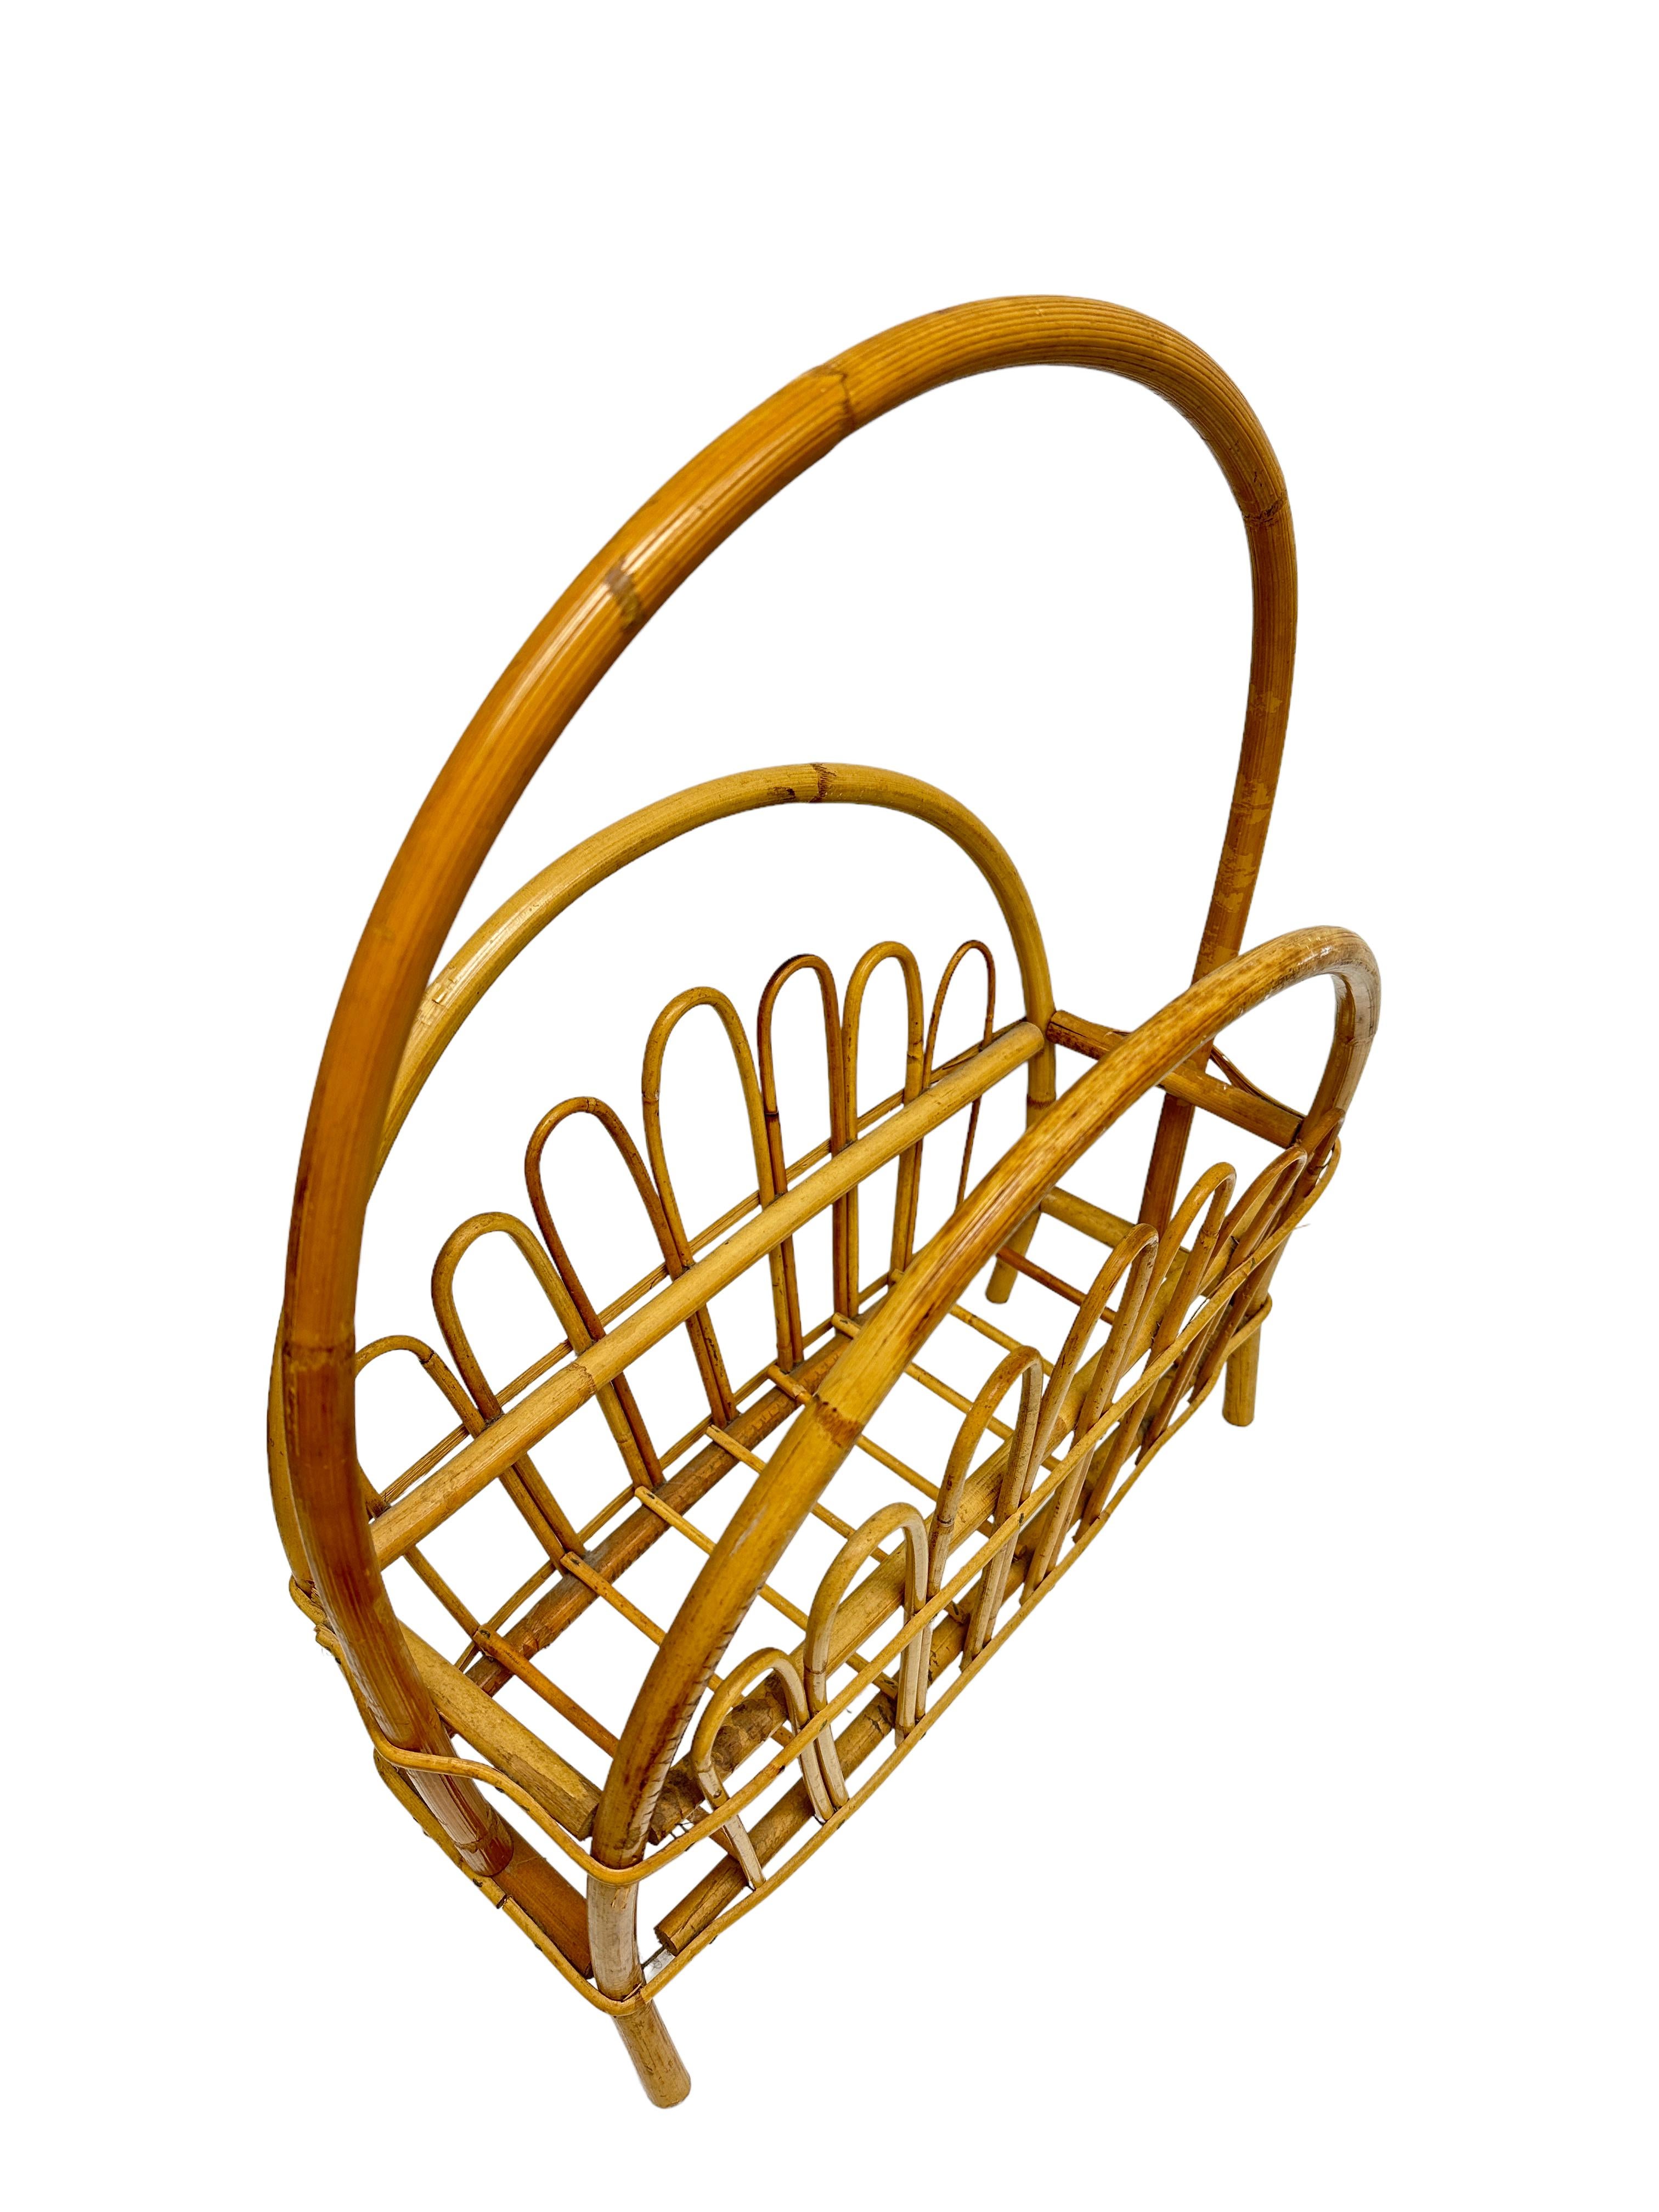 Hand-Crafted Vivai Del Sud Bamboo Wicker Magazine Rack Stand, 1970s, Italy For Sale